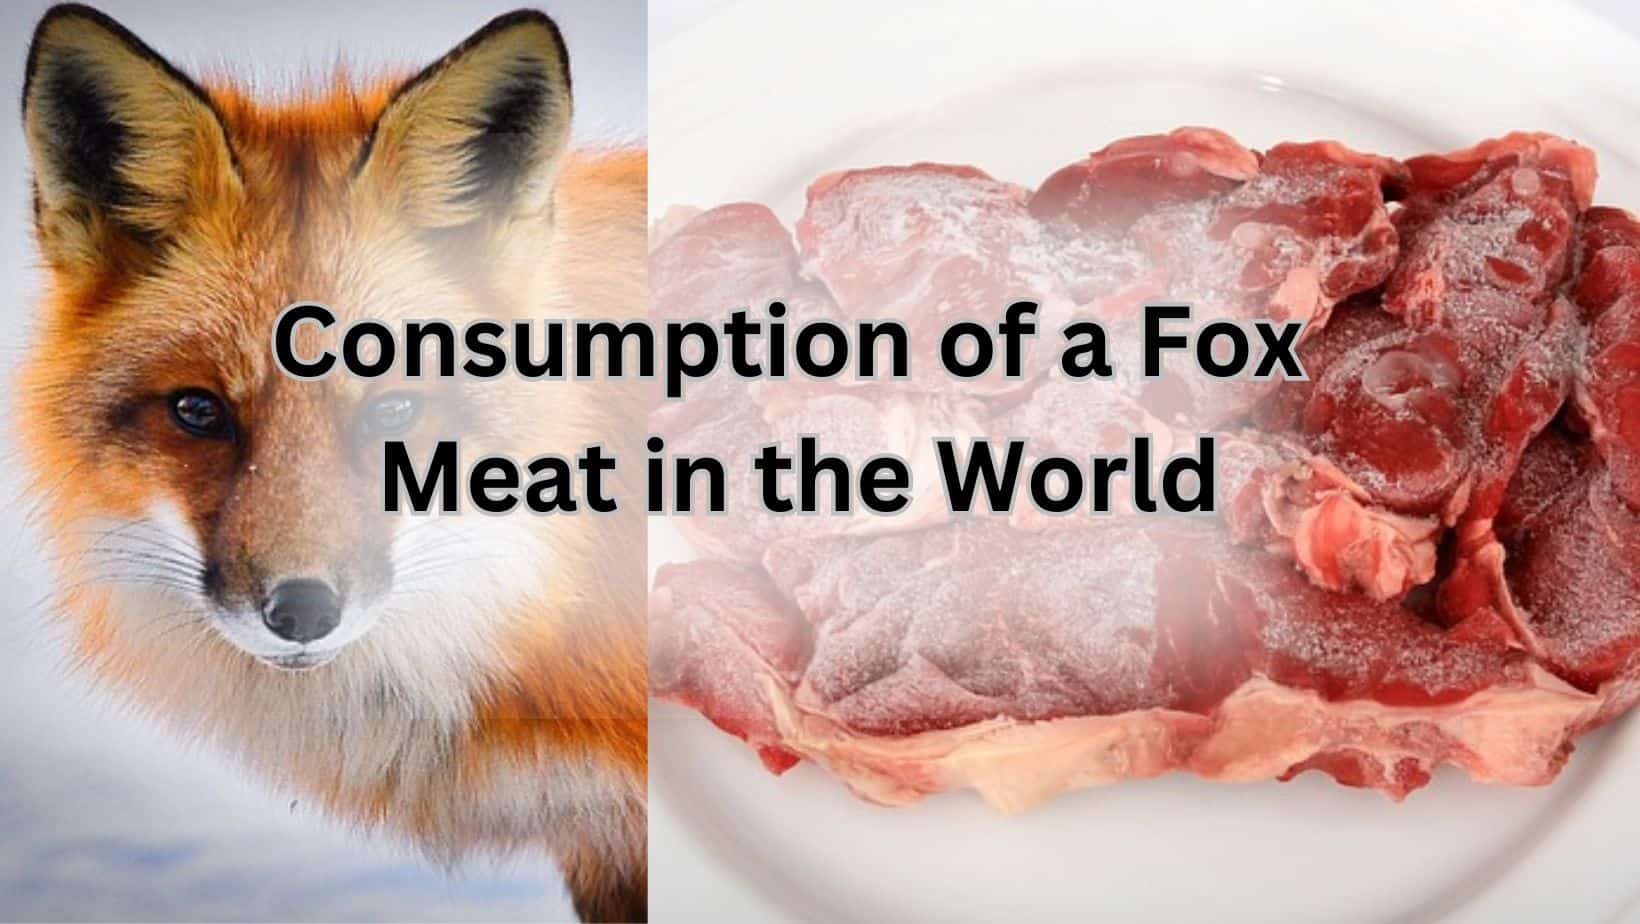 Consumption of a fox meat